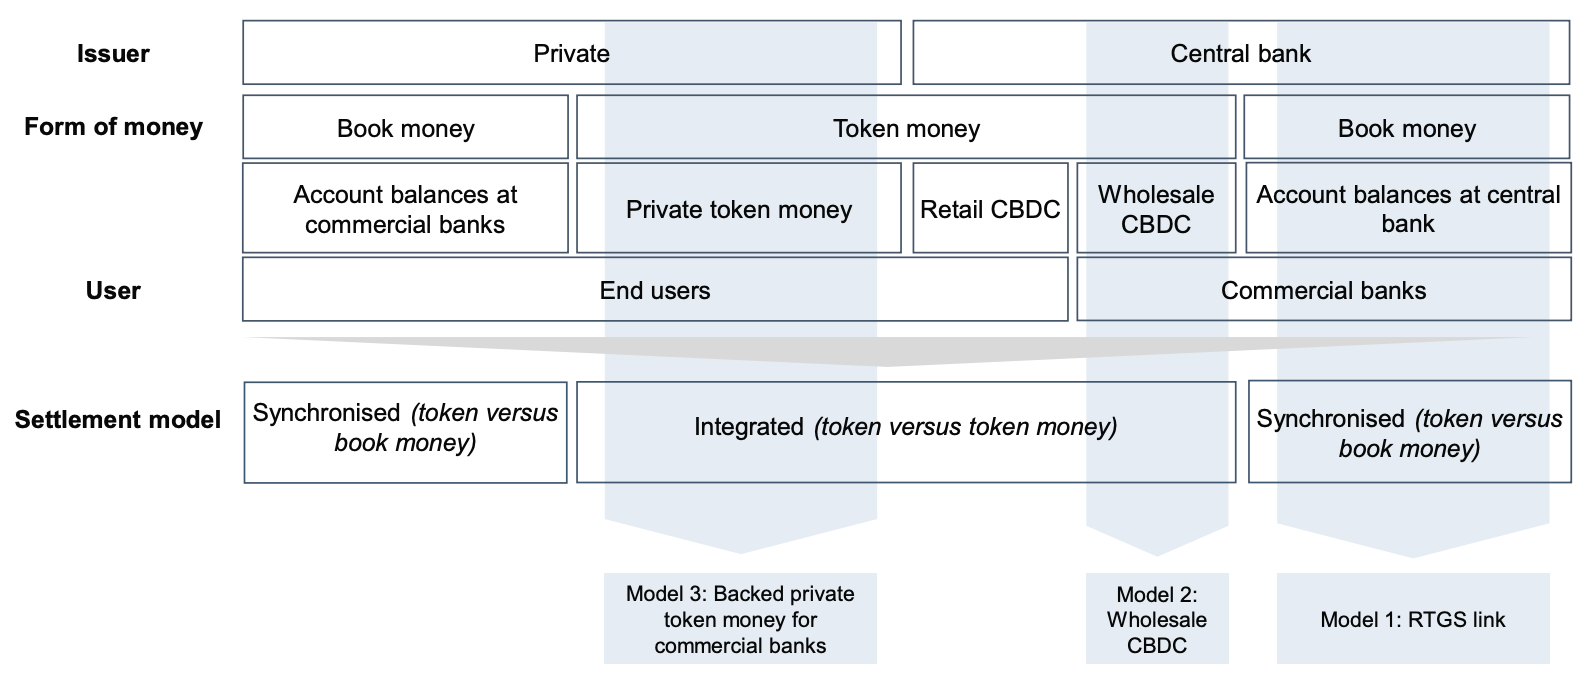 Swiss Central Bank Payment Vision Outlining Focus on DLT, Tokenization and Instant Payments